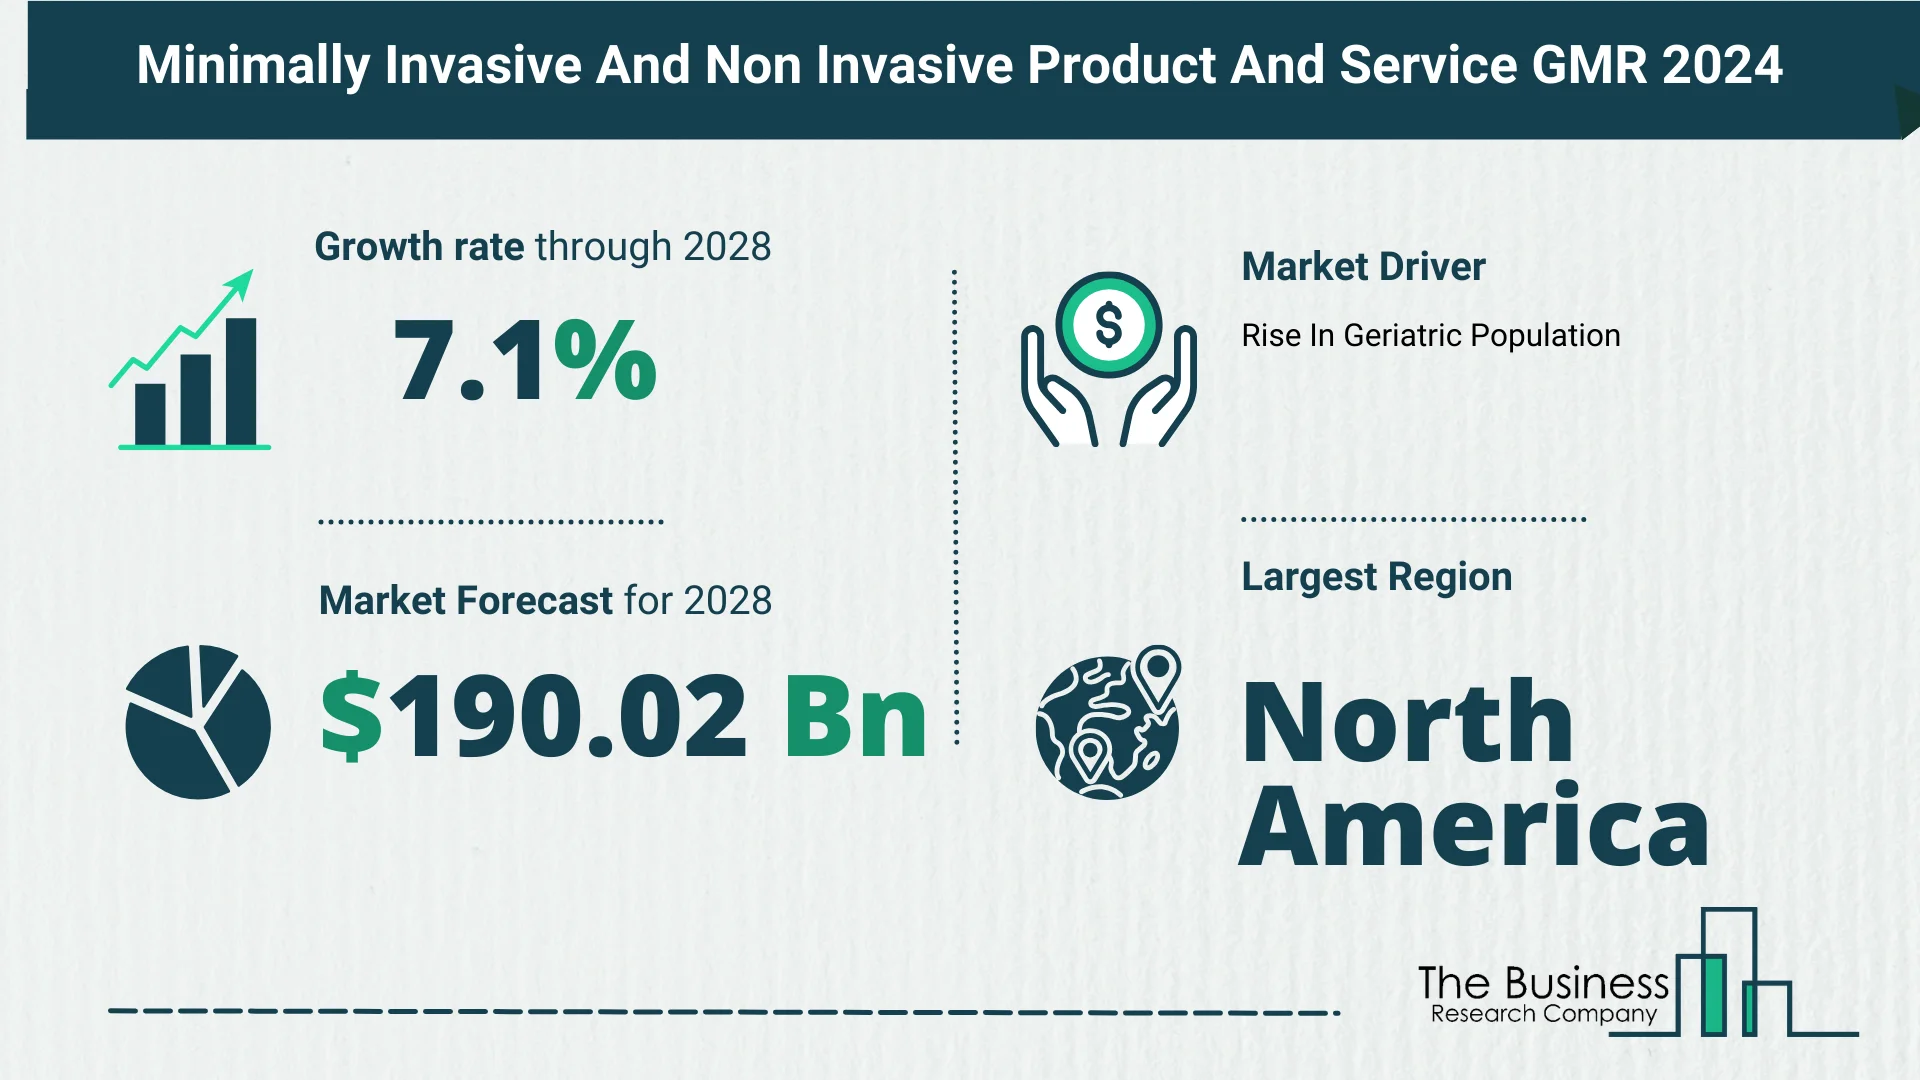 Global Minimally Invasive And Non Invasive Product And Service Market Size